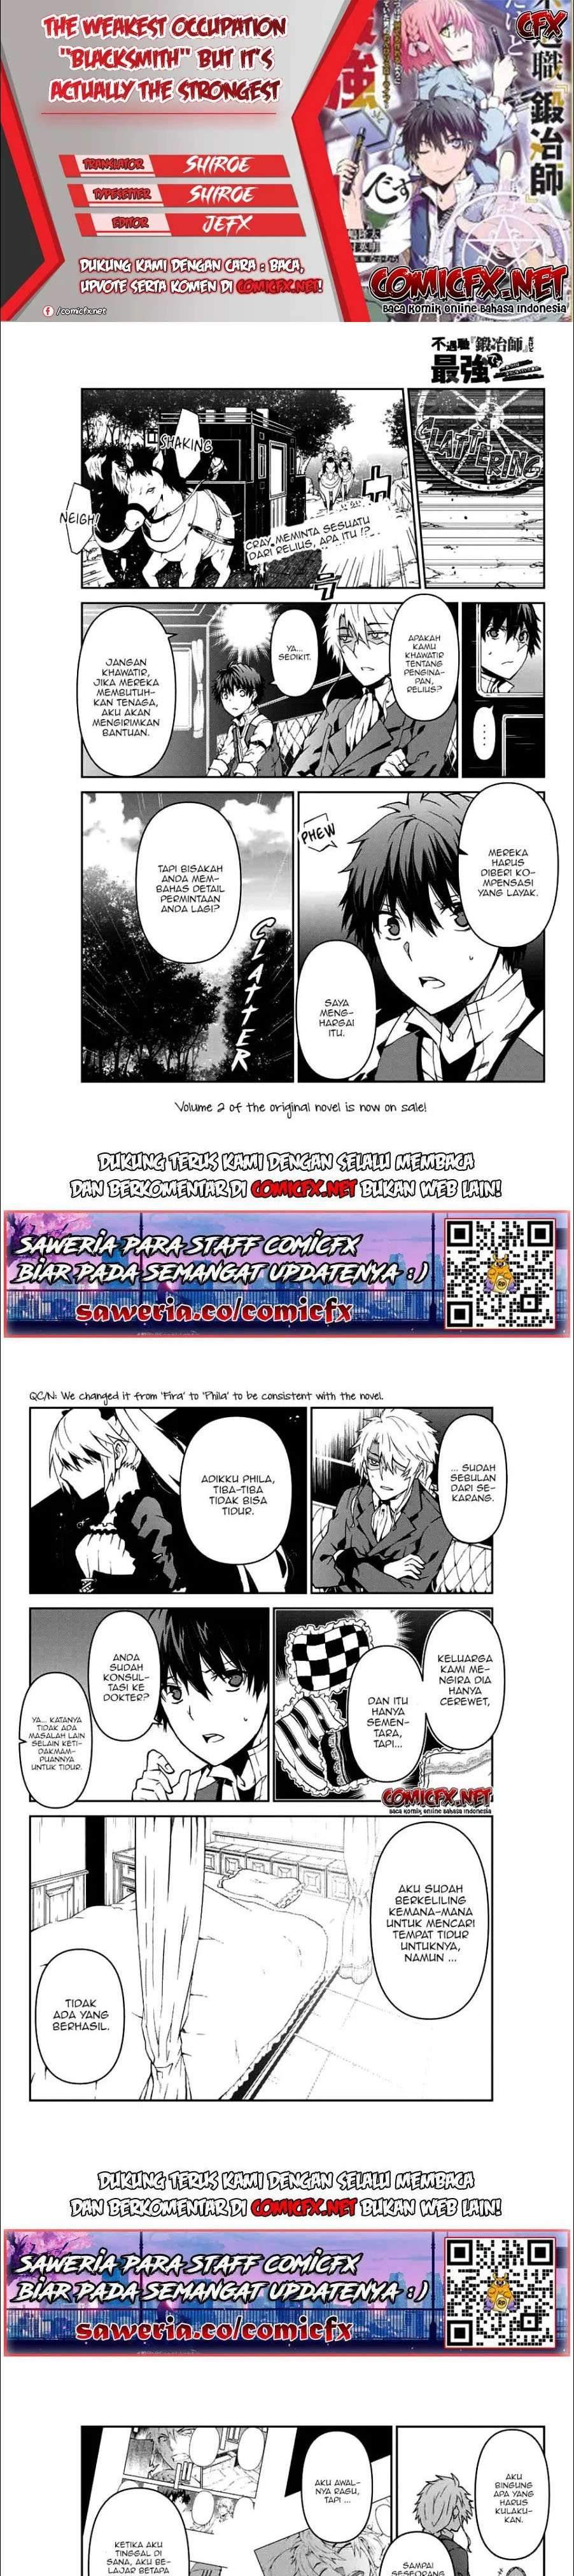 Baca Komik The Weakest Occupation “Blacksmith,” but It’s Actually the Strongest Chapter 8 Gambar 1